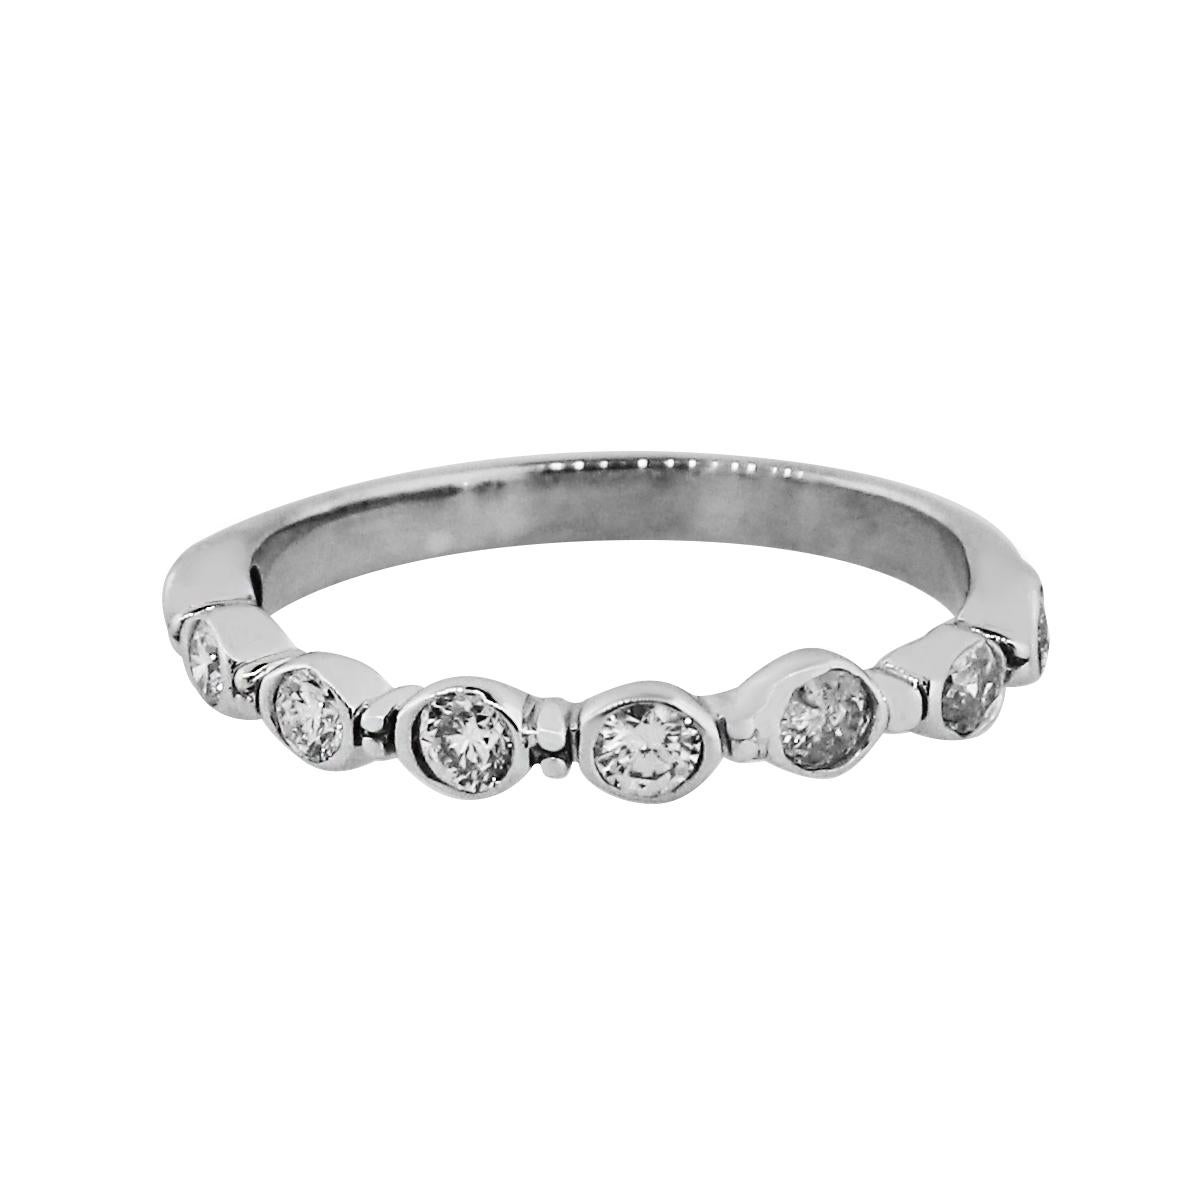 Material: 18k White Gold
Diamond Details: Approximately 0.40ctw round brilliant bezel set diamonds. Diamonds are G/H in color and SI in clarity
Ring Size: 6.75
Item Weight: 2g (1.3dwt)
Measurements: 0.75″ x 0.11″ x 0.75″
SKU: R4971